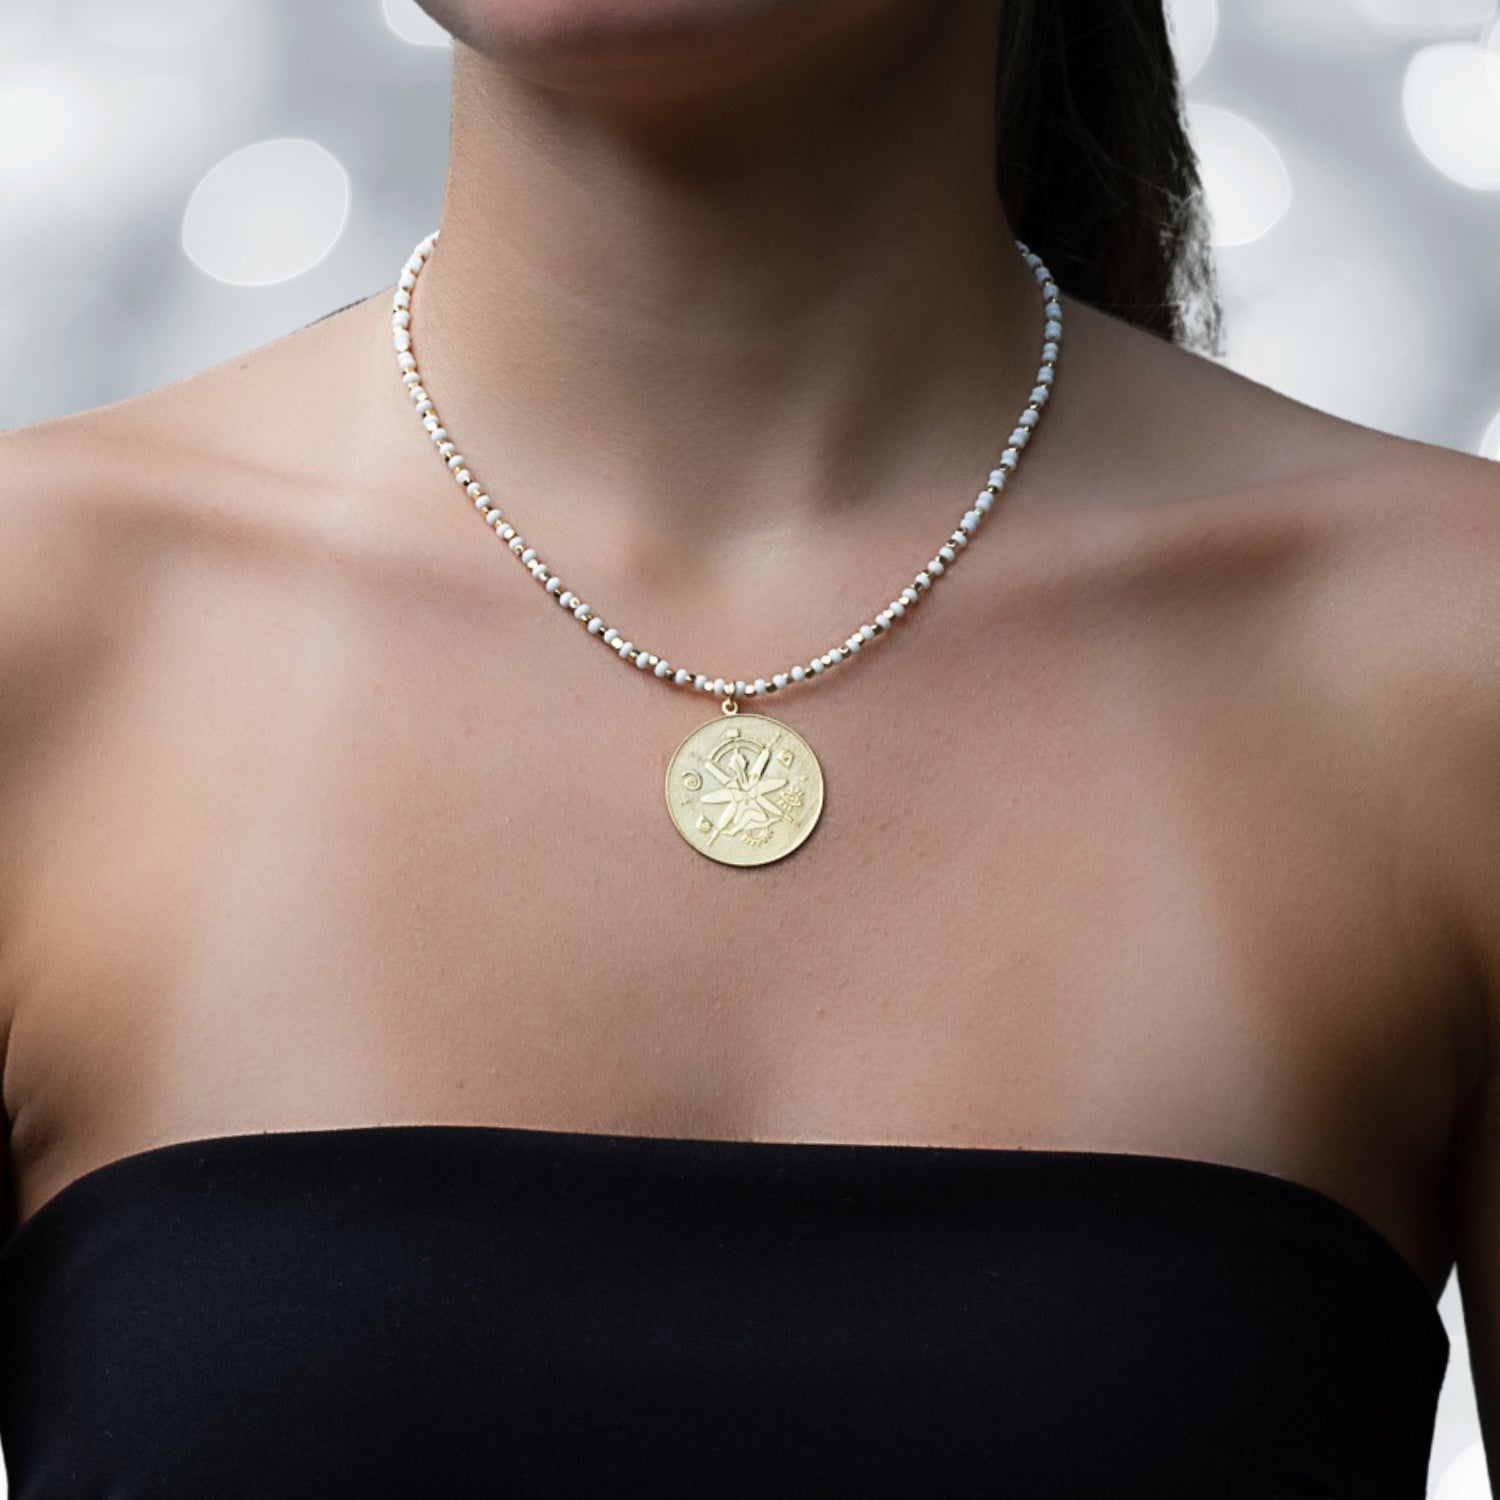 "See The Good" Necklace - Model Exudes Serenity and Strength.